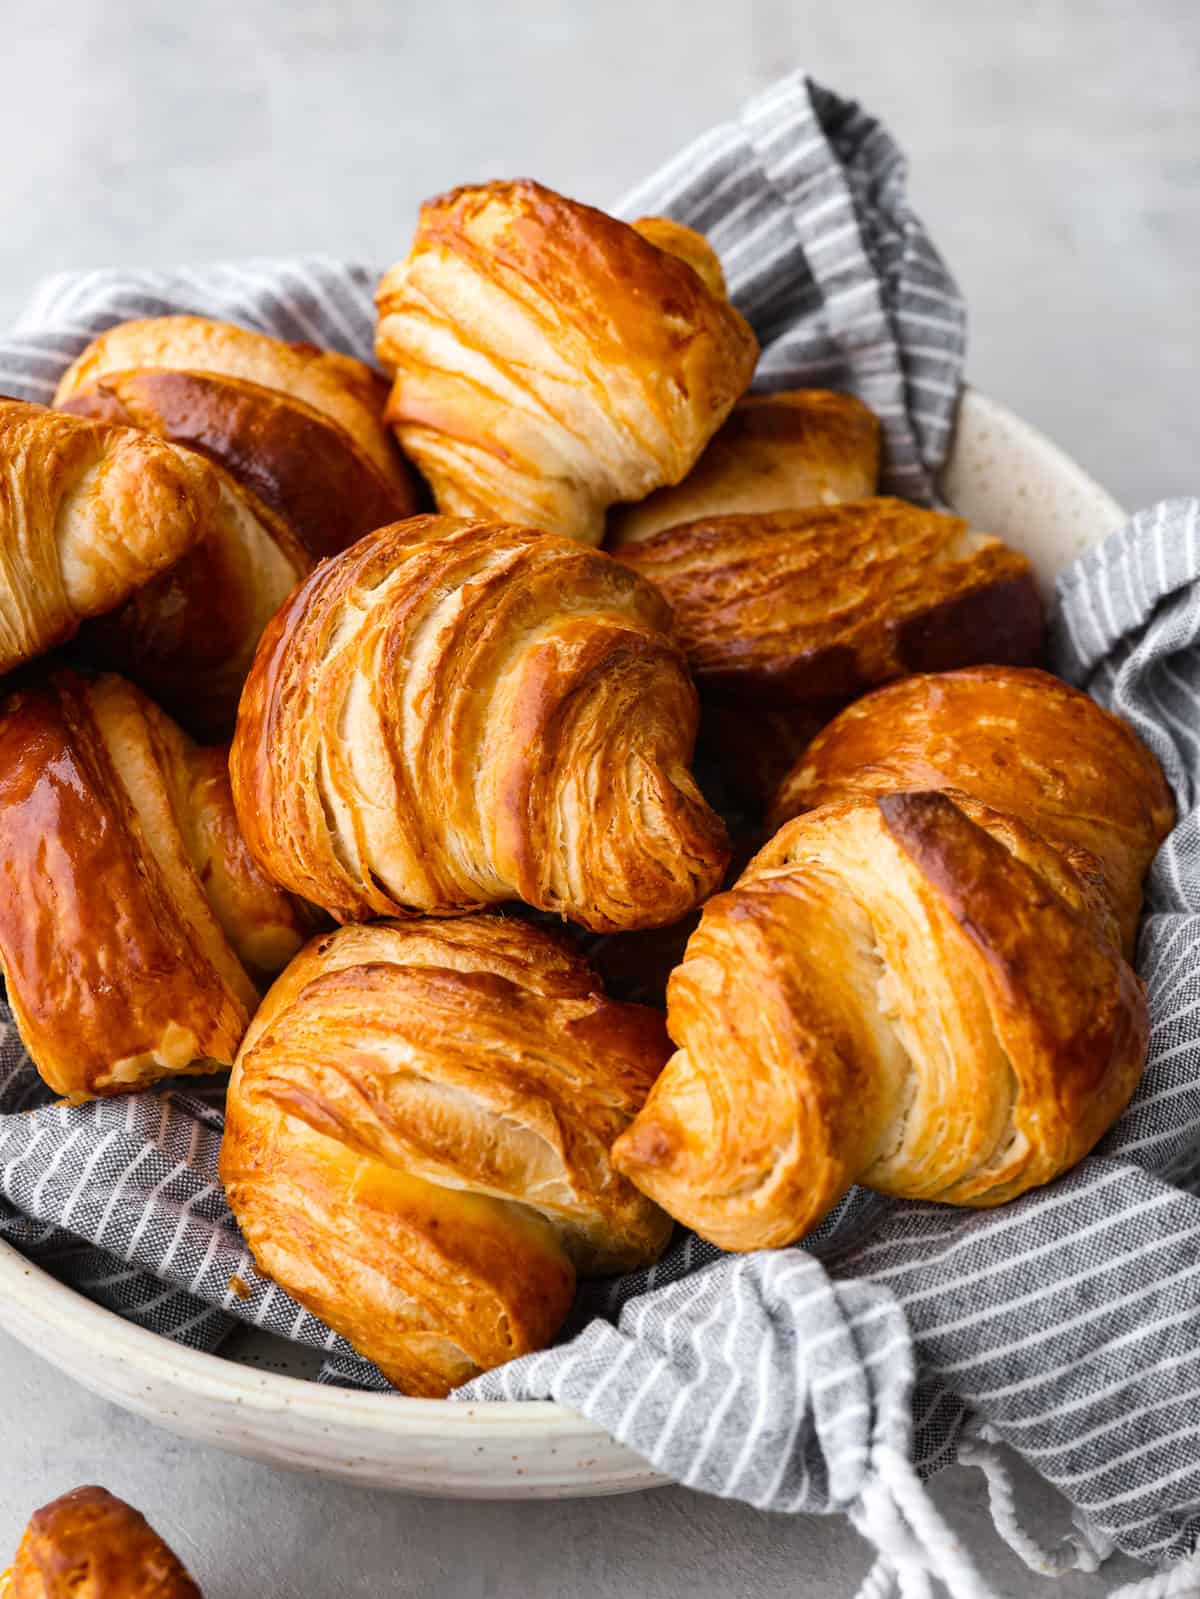 A Recipe for Croissants classic